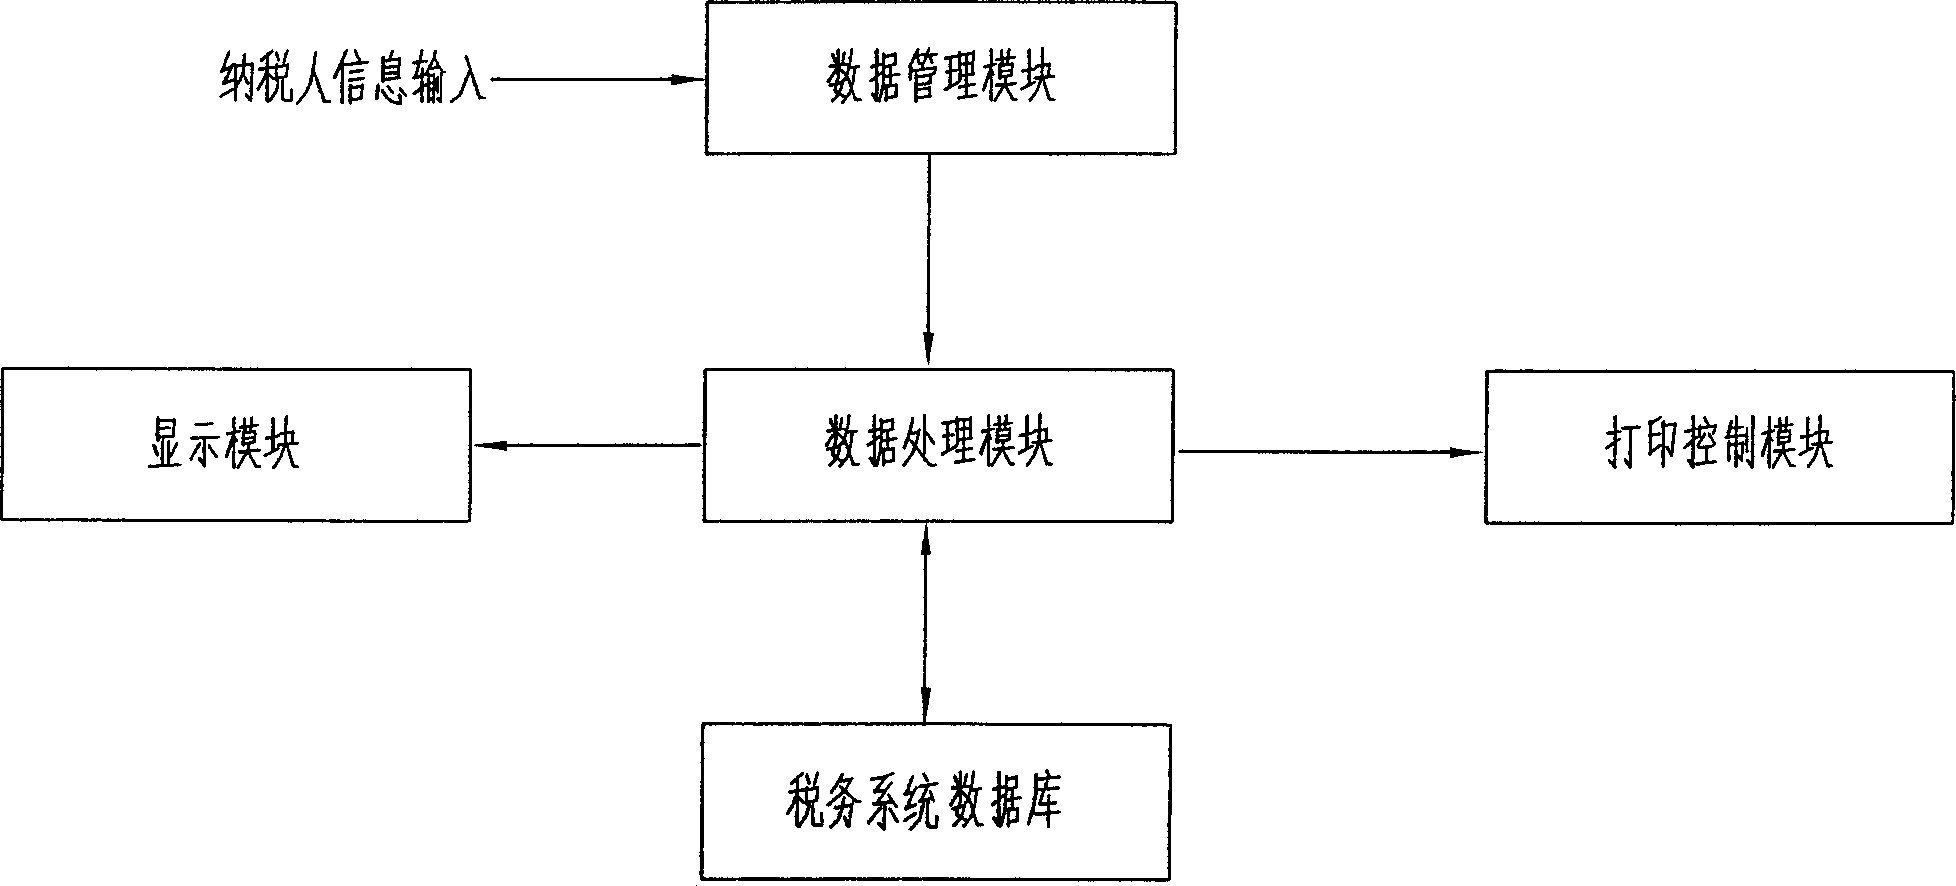 System for making out invoices for tax receipt of deducting tax automatically, and application method